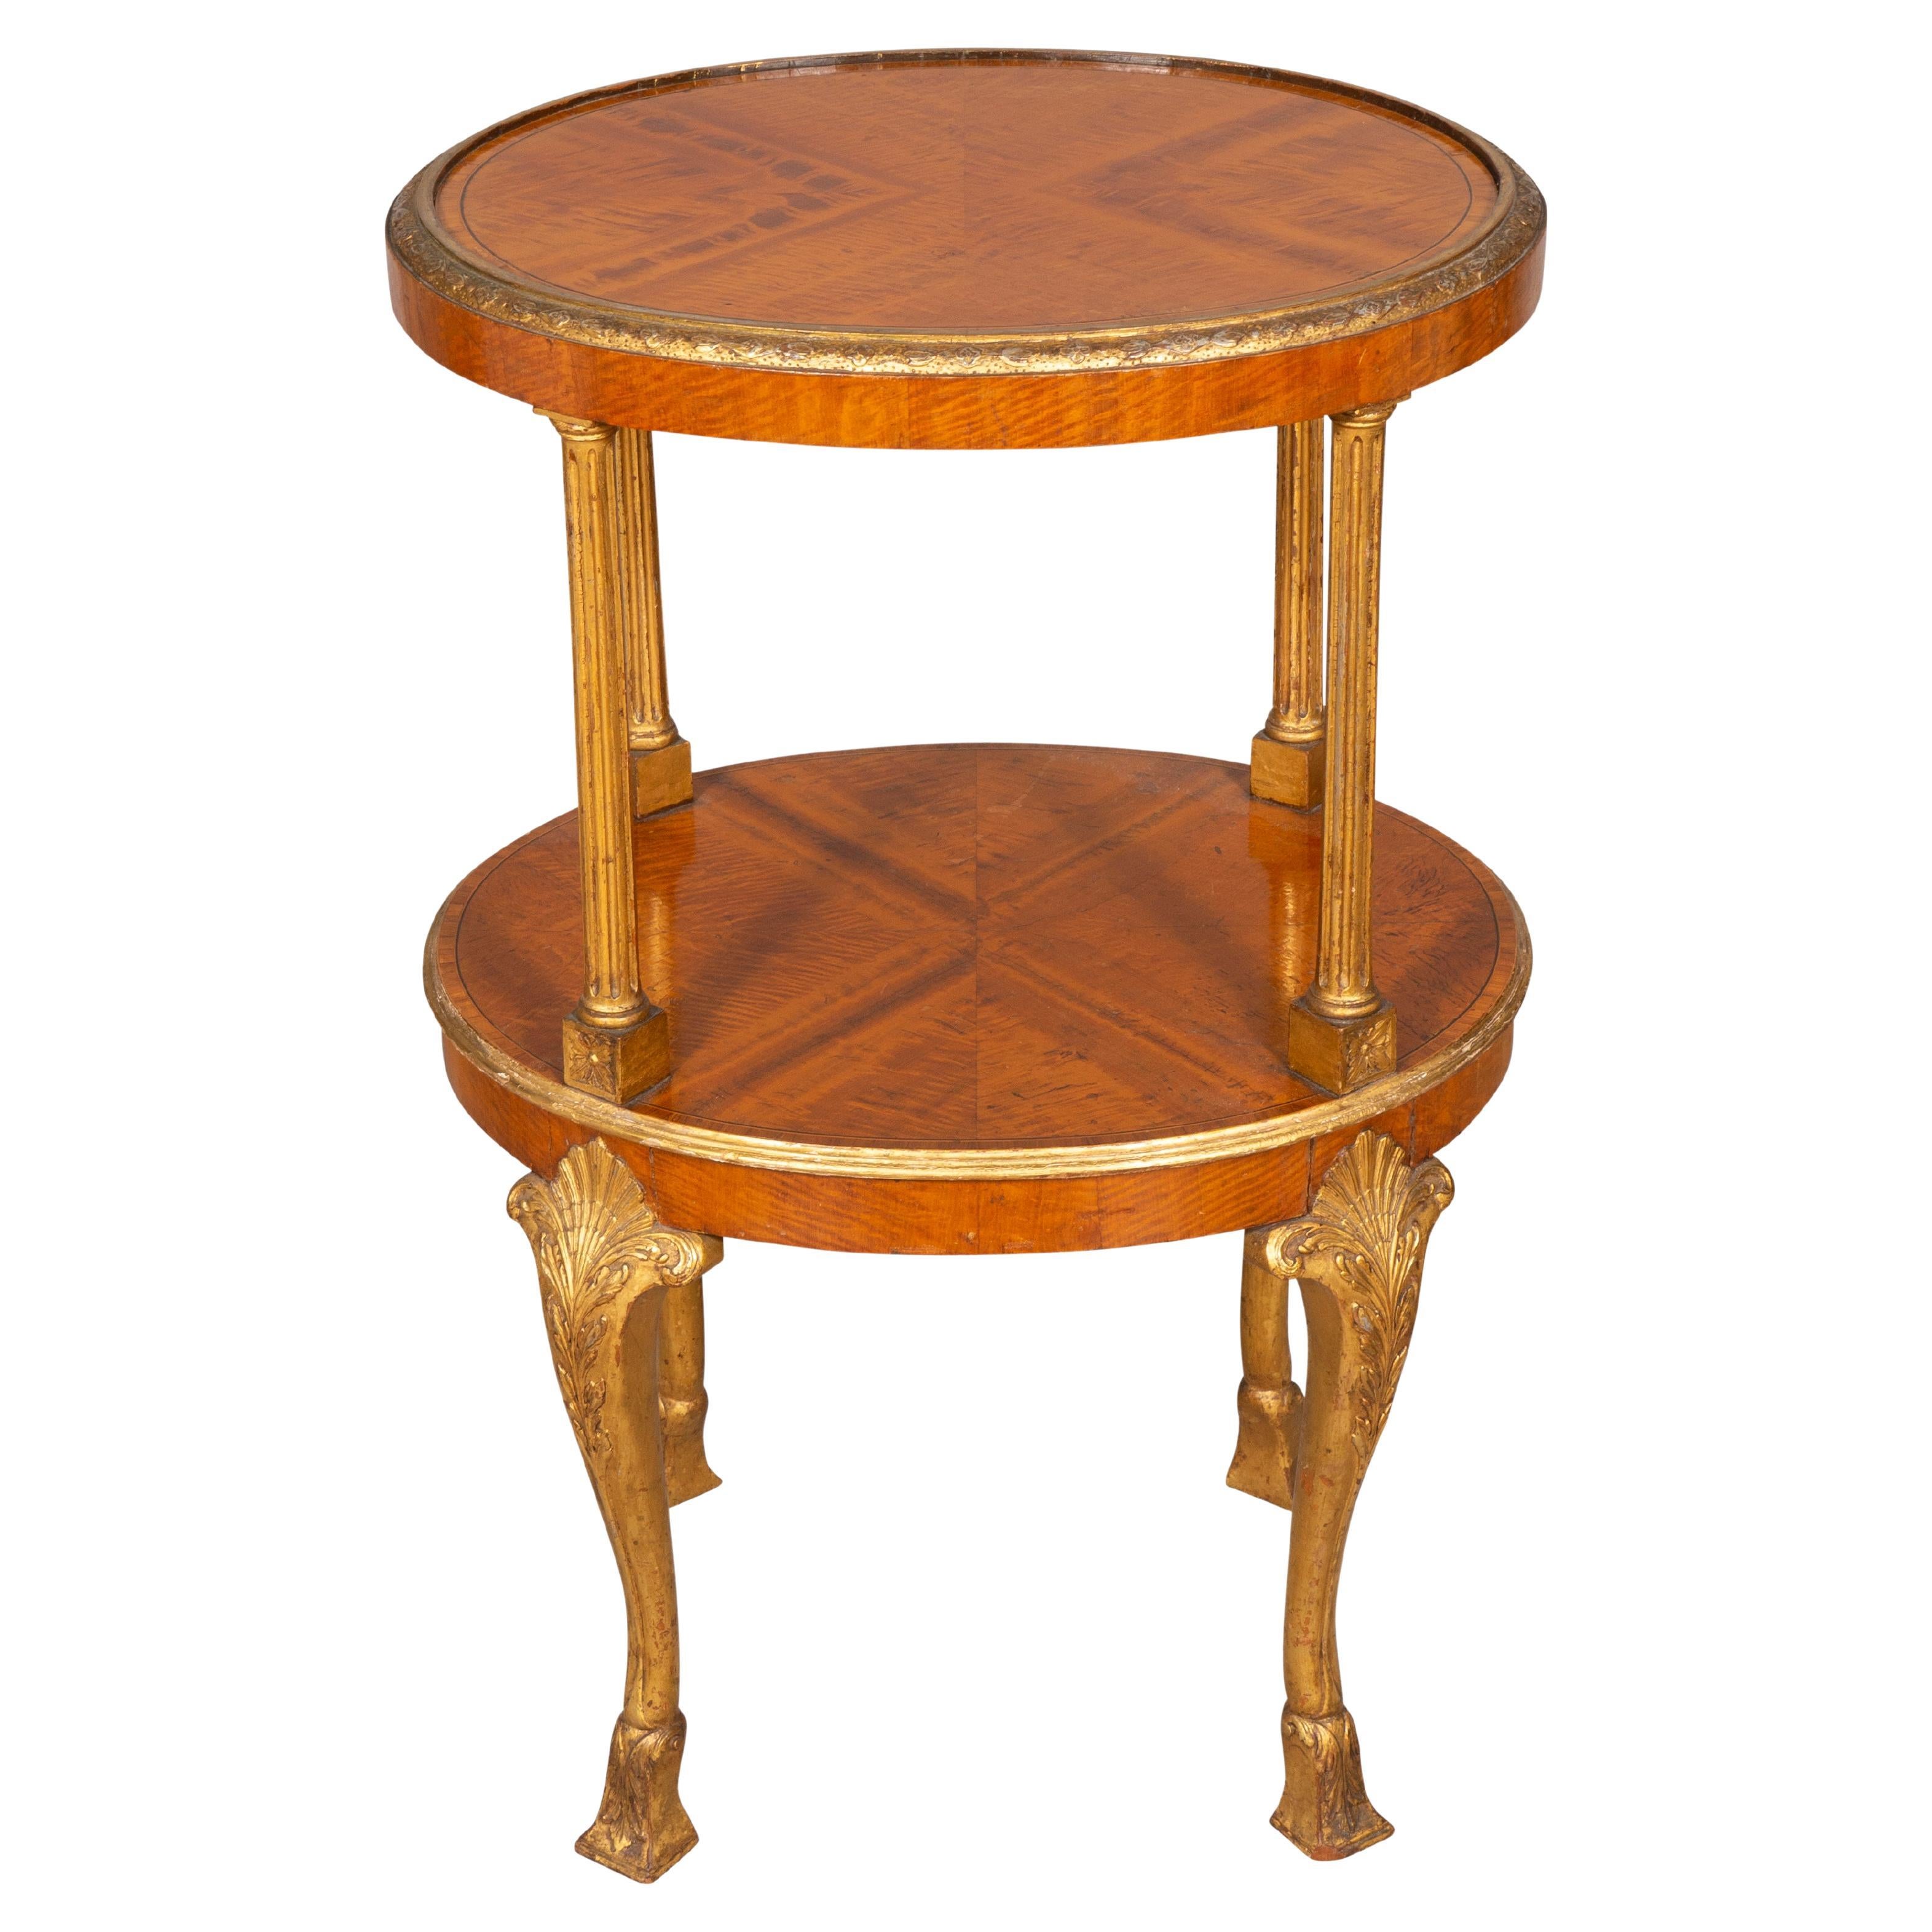 The finest quality. Oval top with quarter veneers and with crossbanded detailed carved edge over a conforming shelf divided by columns and raised on well carved cabriole legs joining shell carved knees ending on square feet. The underside with an